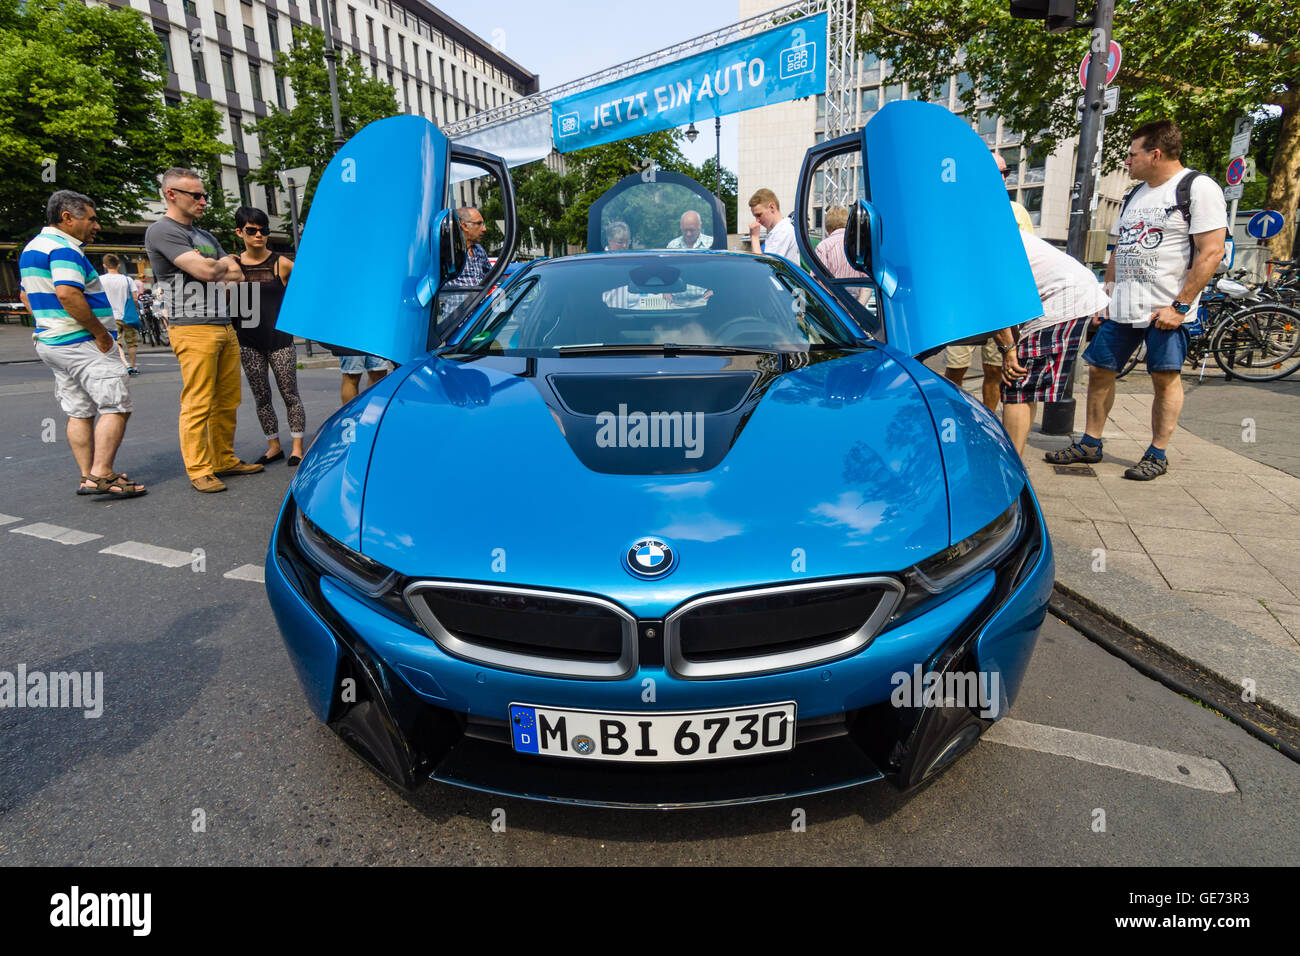 Supercar BMW i8 - first introduced as the BMW Concept Vision Efficient Dynamics, is a plug-in hybrid sports car developed by BMW Stock Photo